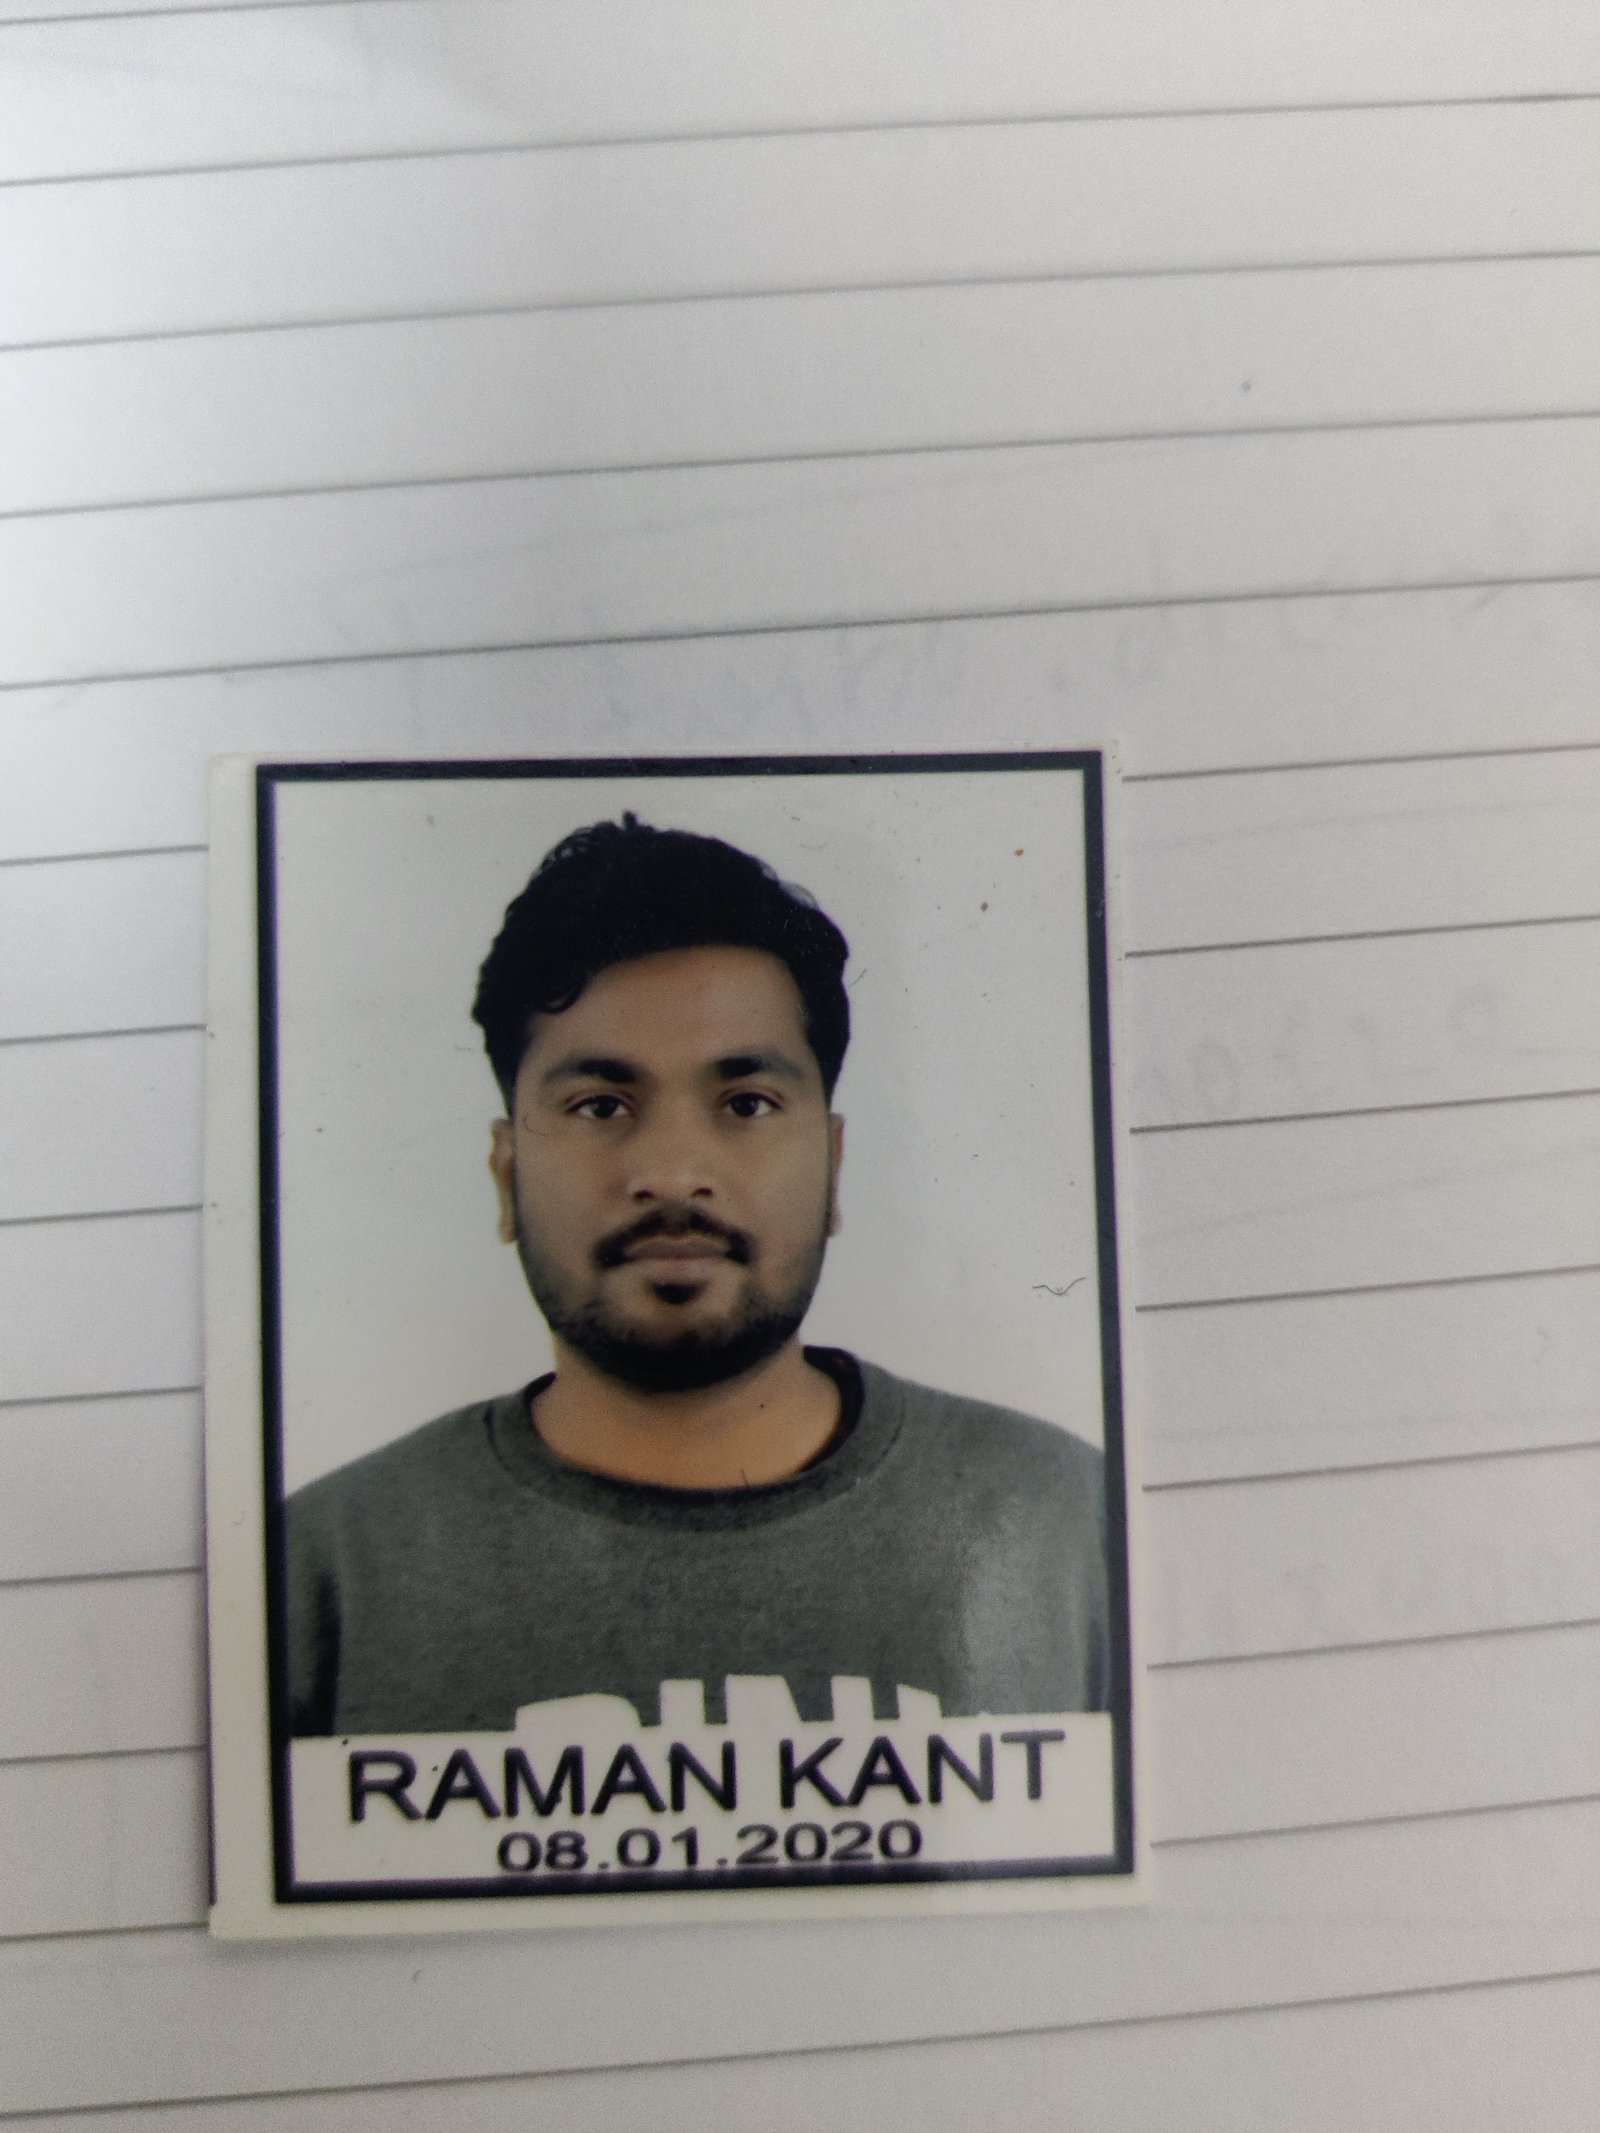 Placed candidate of 4Achievers - Raman kant